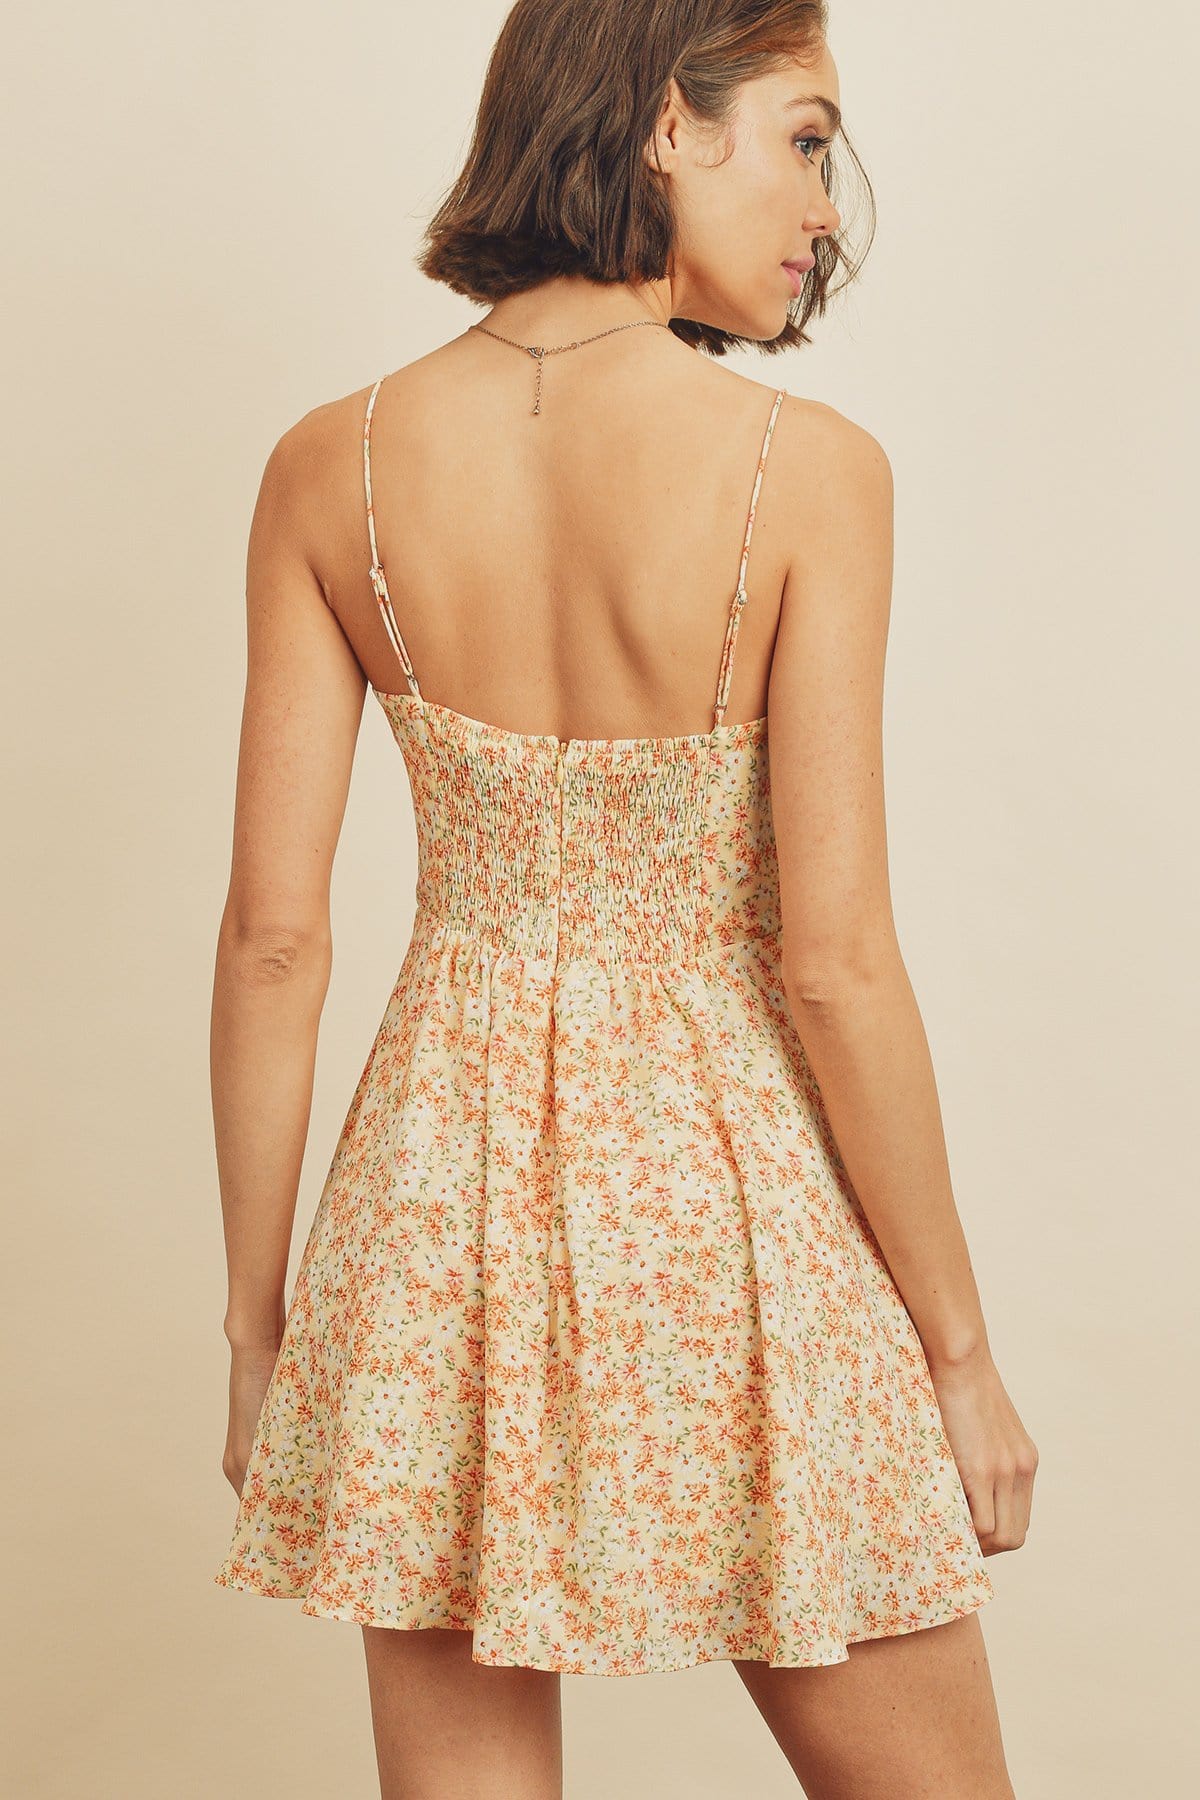 Lily Floral Dress - Lovely Brielle